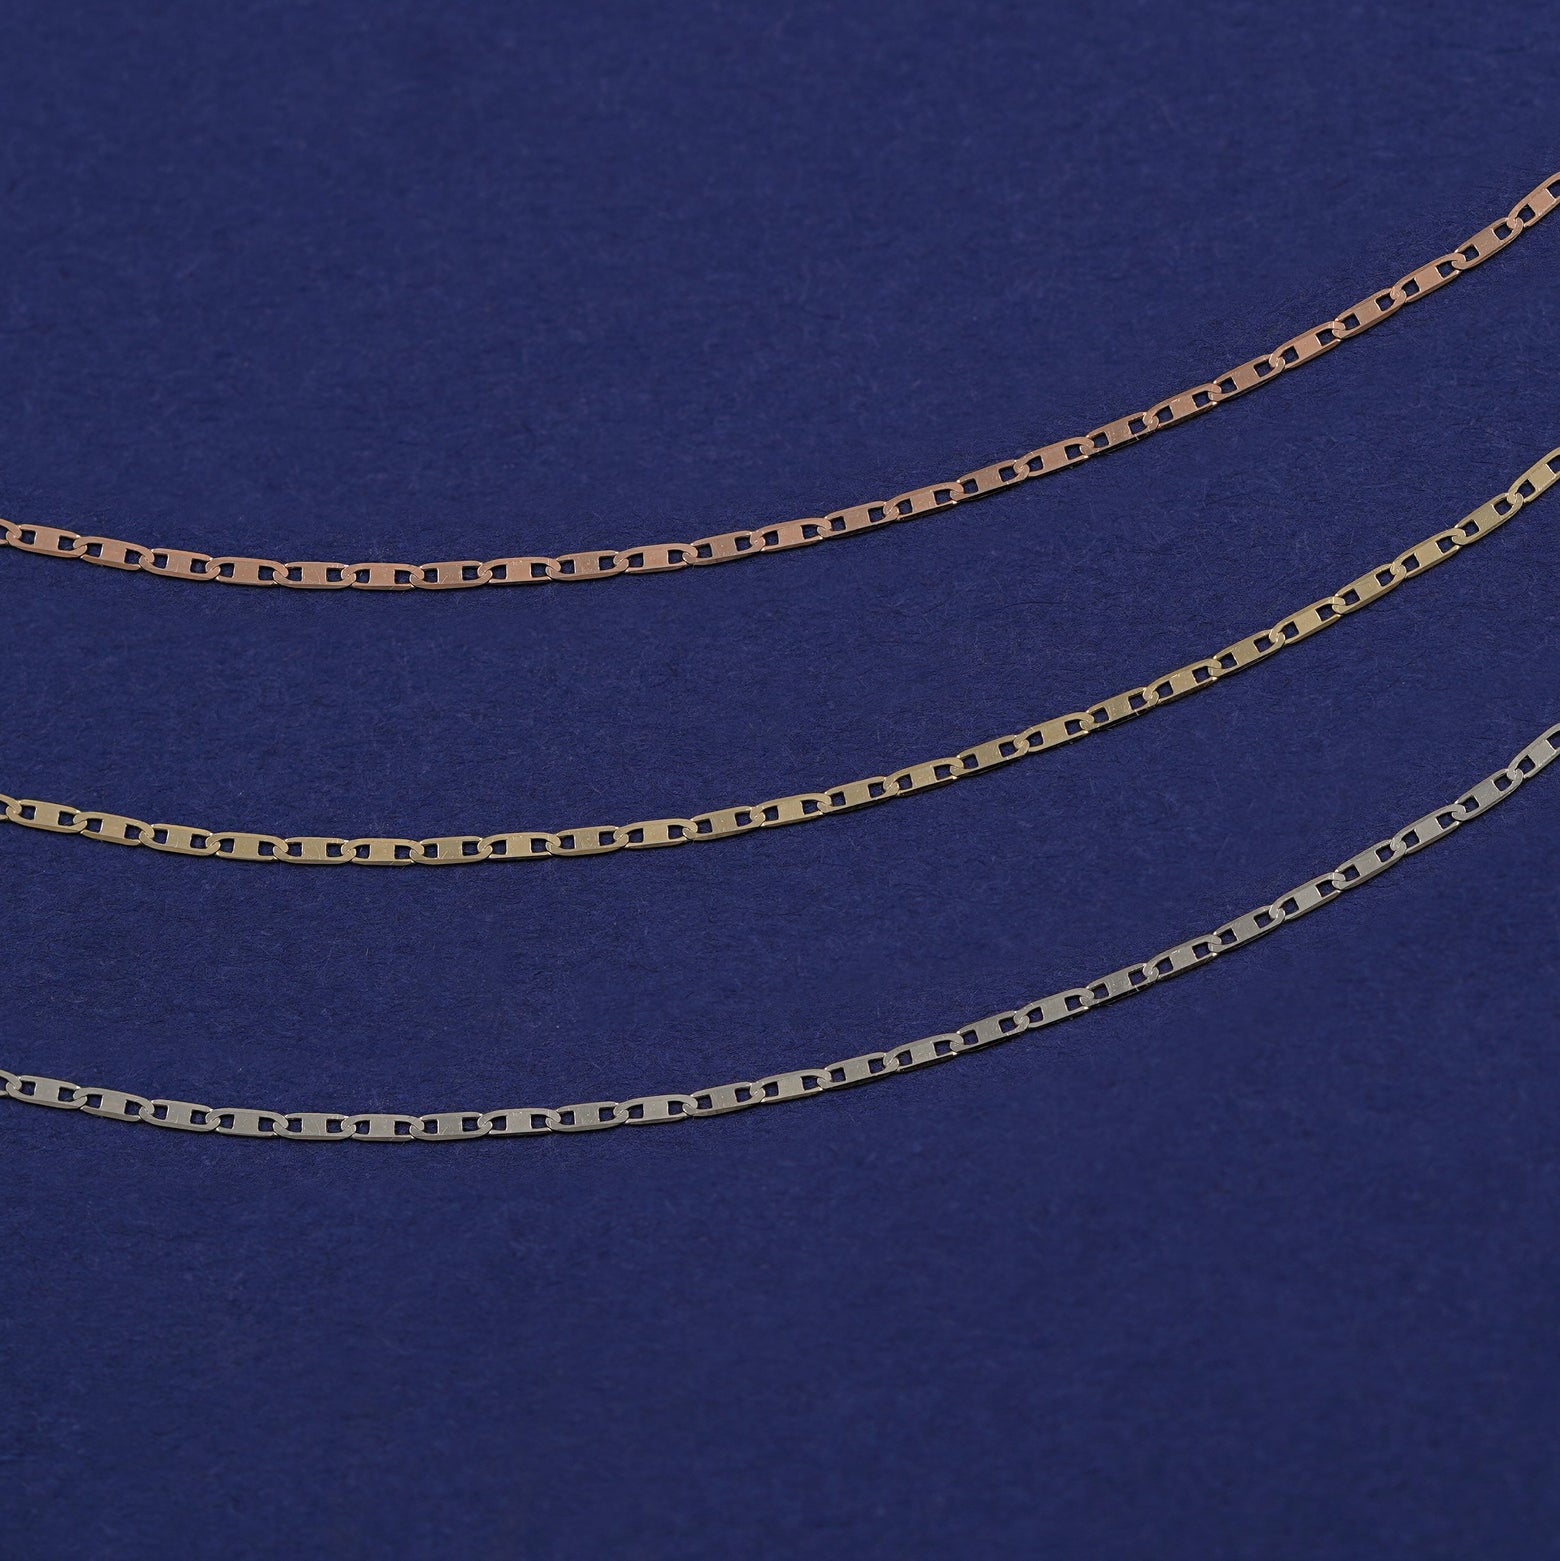 Three Valentine Anklets shown in options of rose, yellow, and white gold